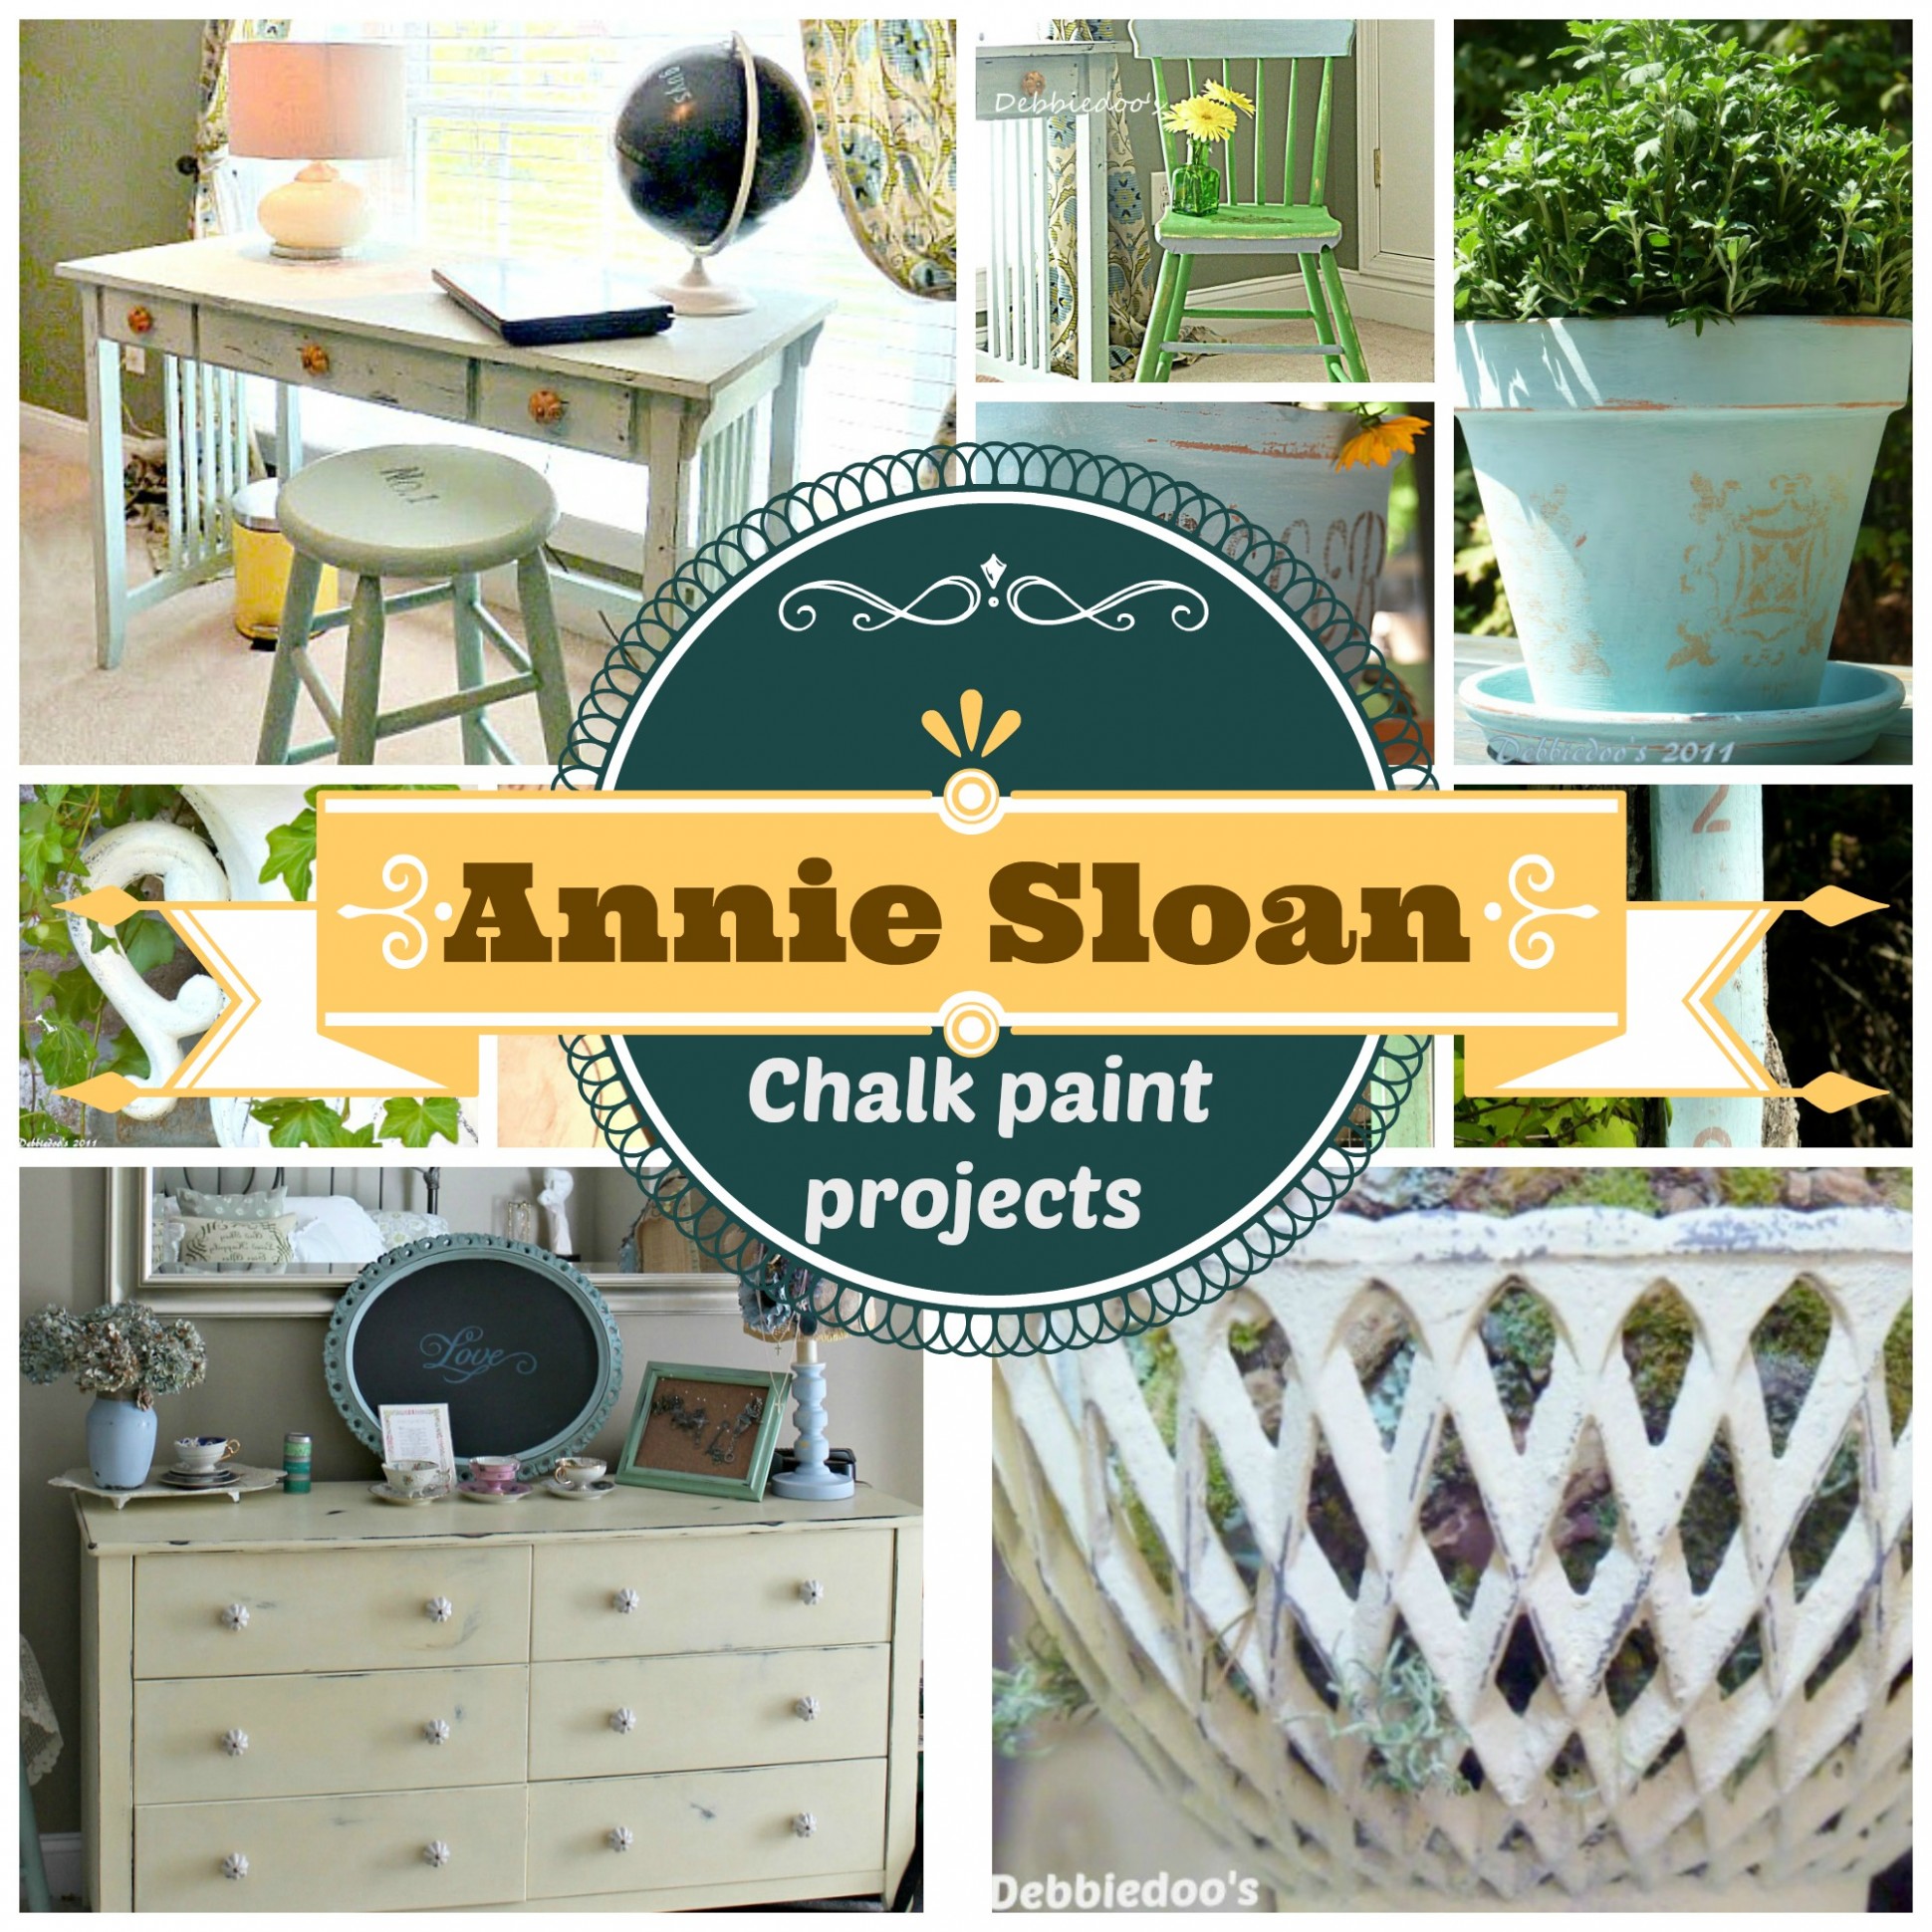 Chalk Paint Projects With Annie Sloan Debbiedoos Chalk Paint (r) By Annie Sloan